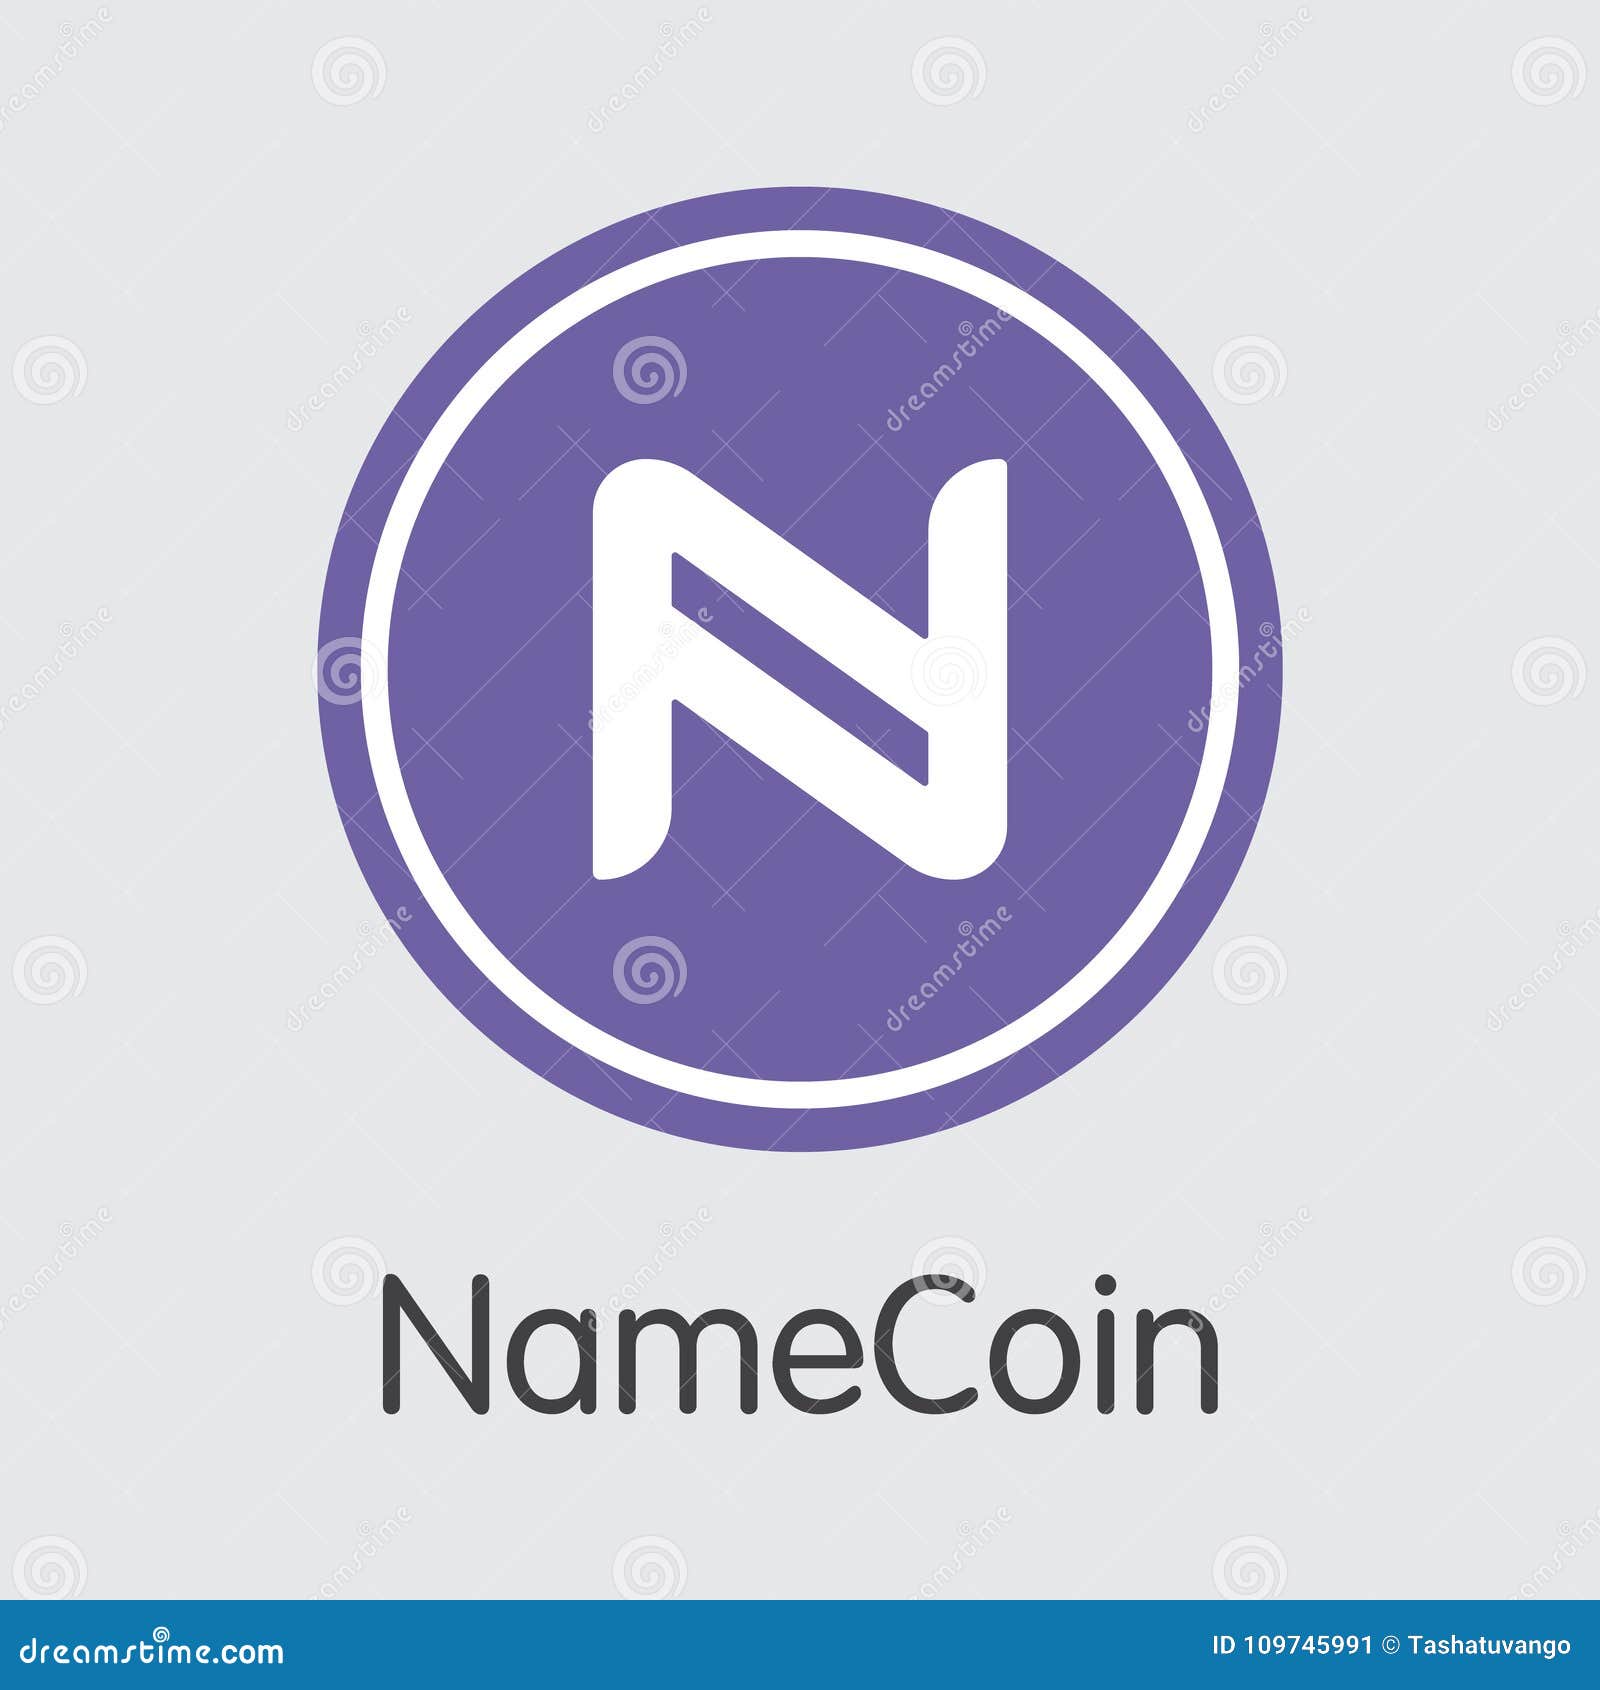 Namecoin Price History Chart - All NMC Historical Data